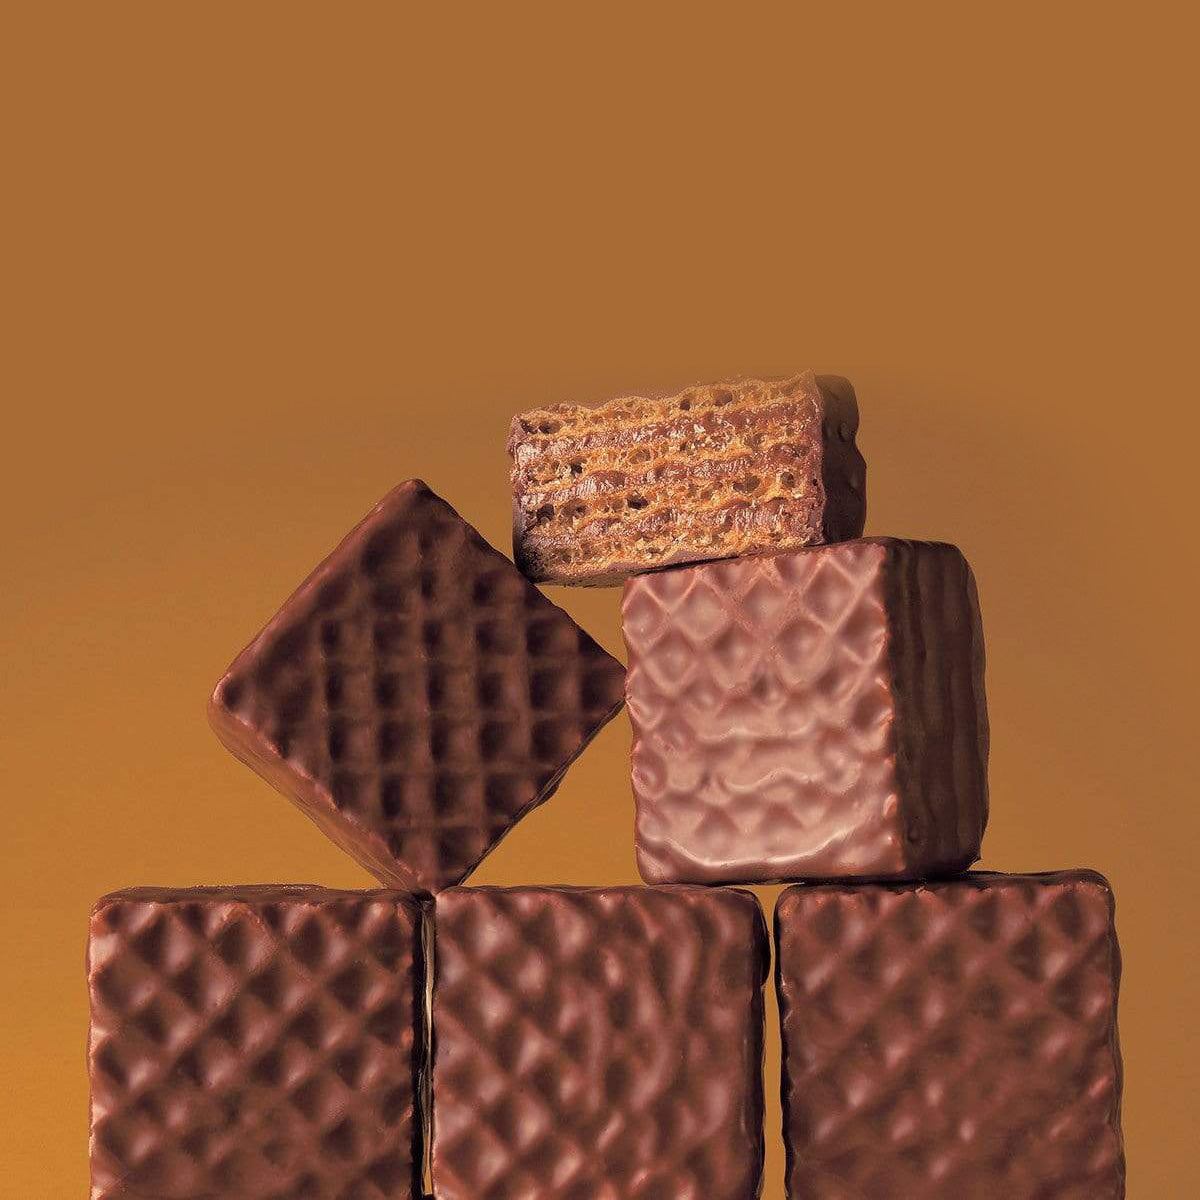 ROYCE' Chocolate - Chocolate Wafers "Hazel Cream" - Image shows stacks of brown chocolate wafers with a crisscrossed texture. Background is in brown. 